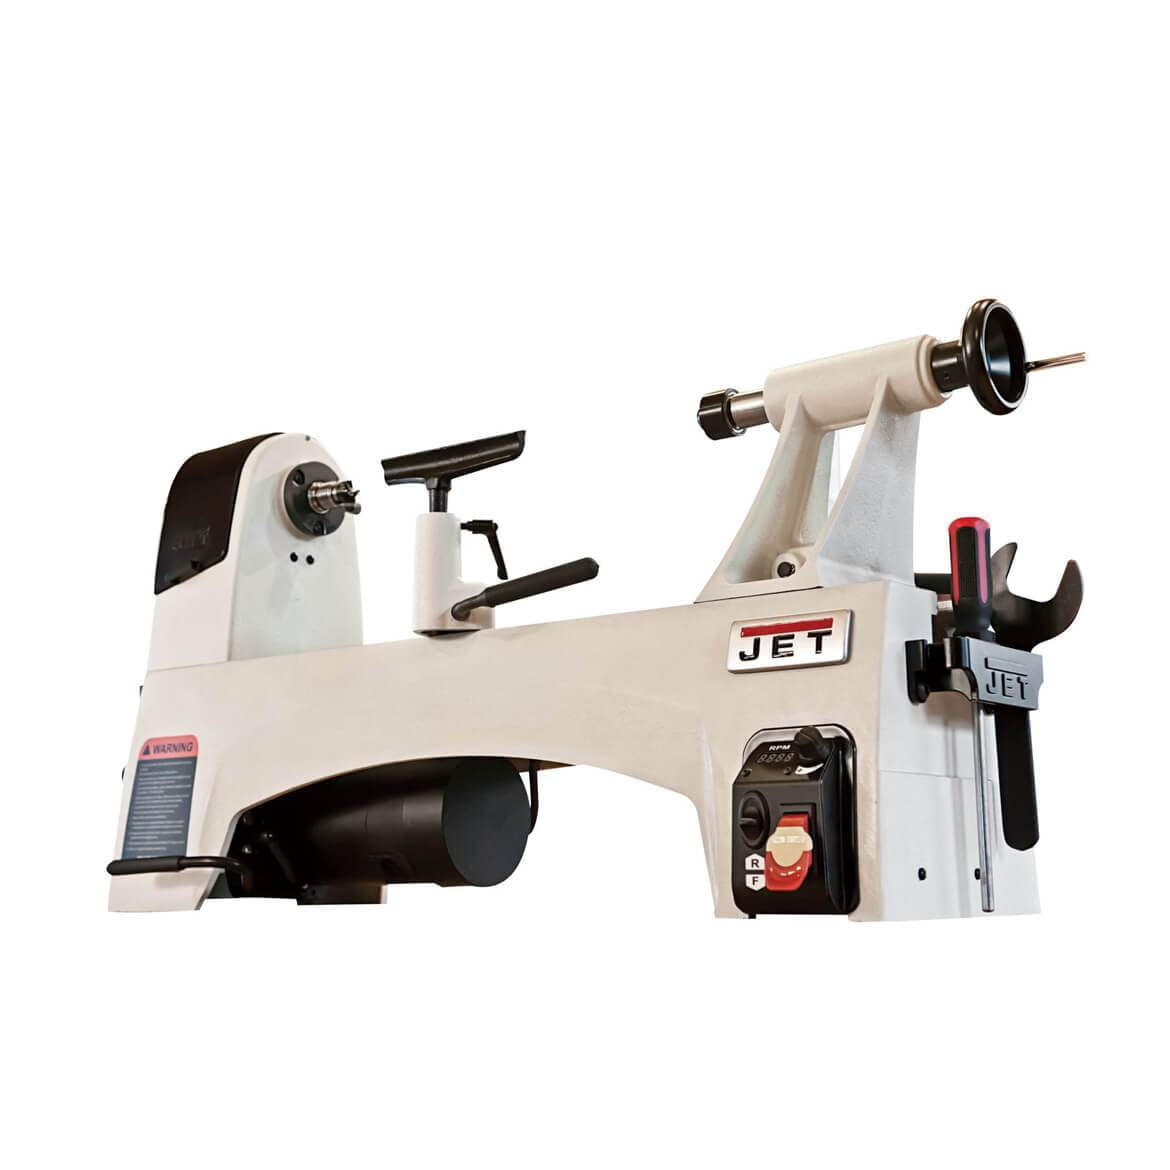 JET JWL-1221VS 12-Inch by 21-Inch Variable Speed Wood Lathe for sale online